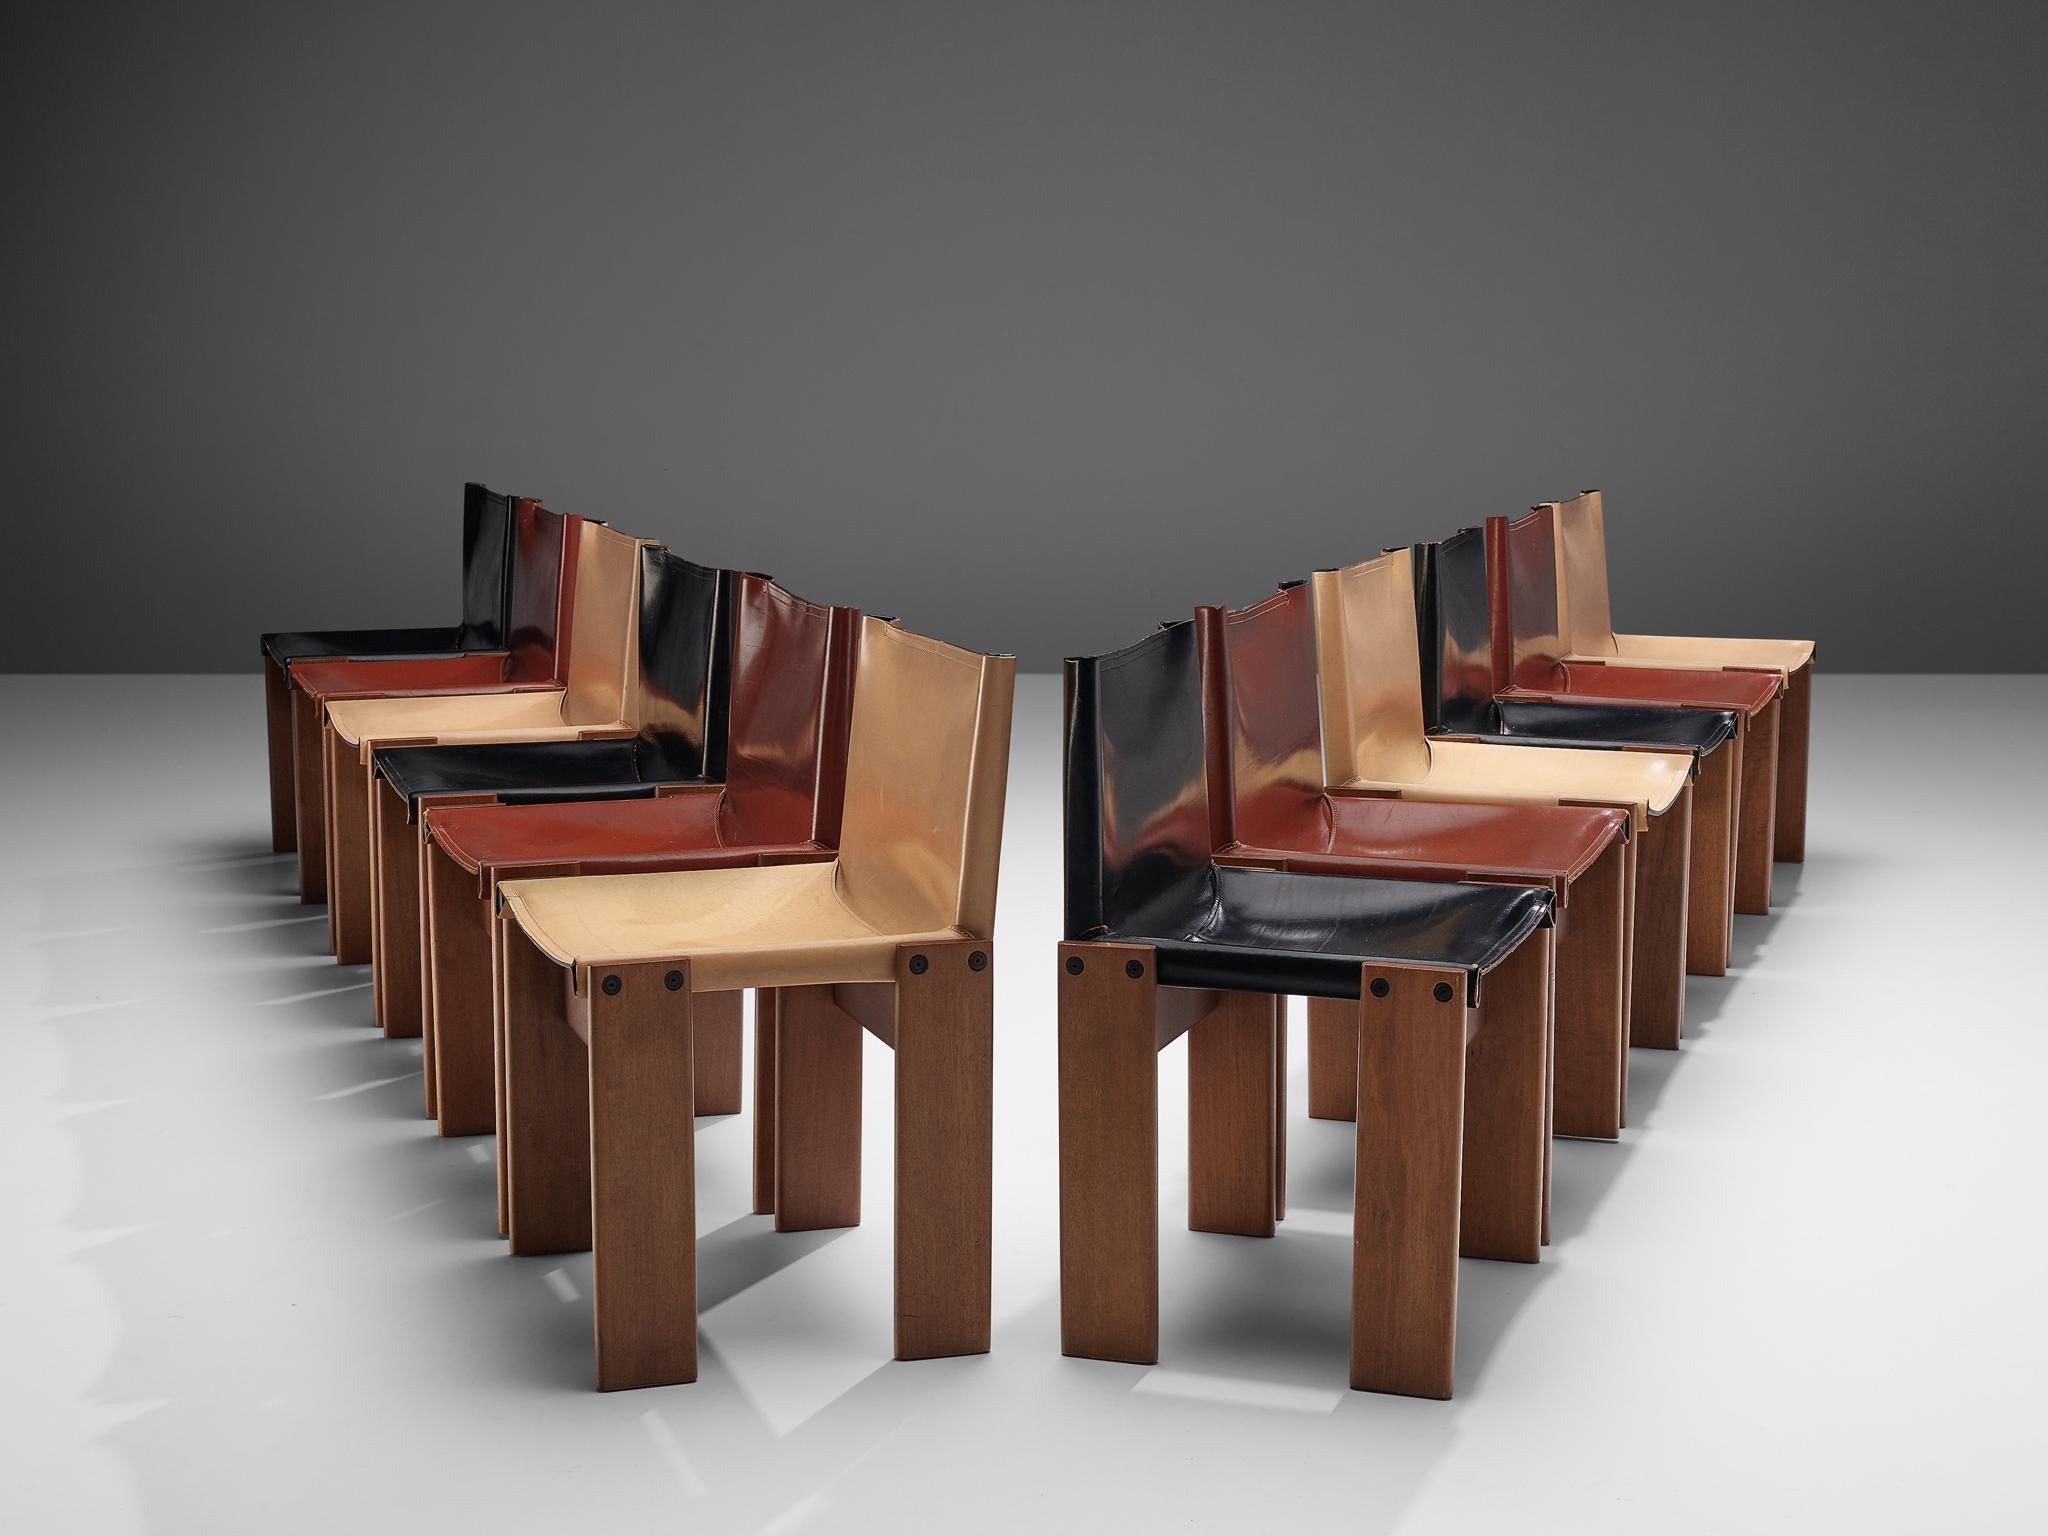 Afra & Tobia Scarpa for Molteni, twelve dining chairs, patinated beech, black, beige and red leather, Italy, 1974.

The different colors in leather form a striking combination with the blond wood. Interesting is the 'flat' shape of this chair